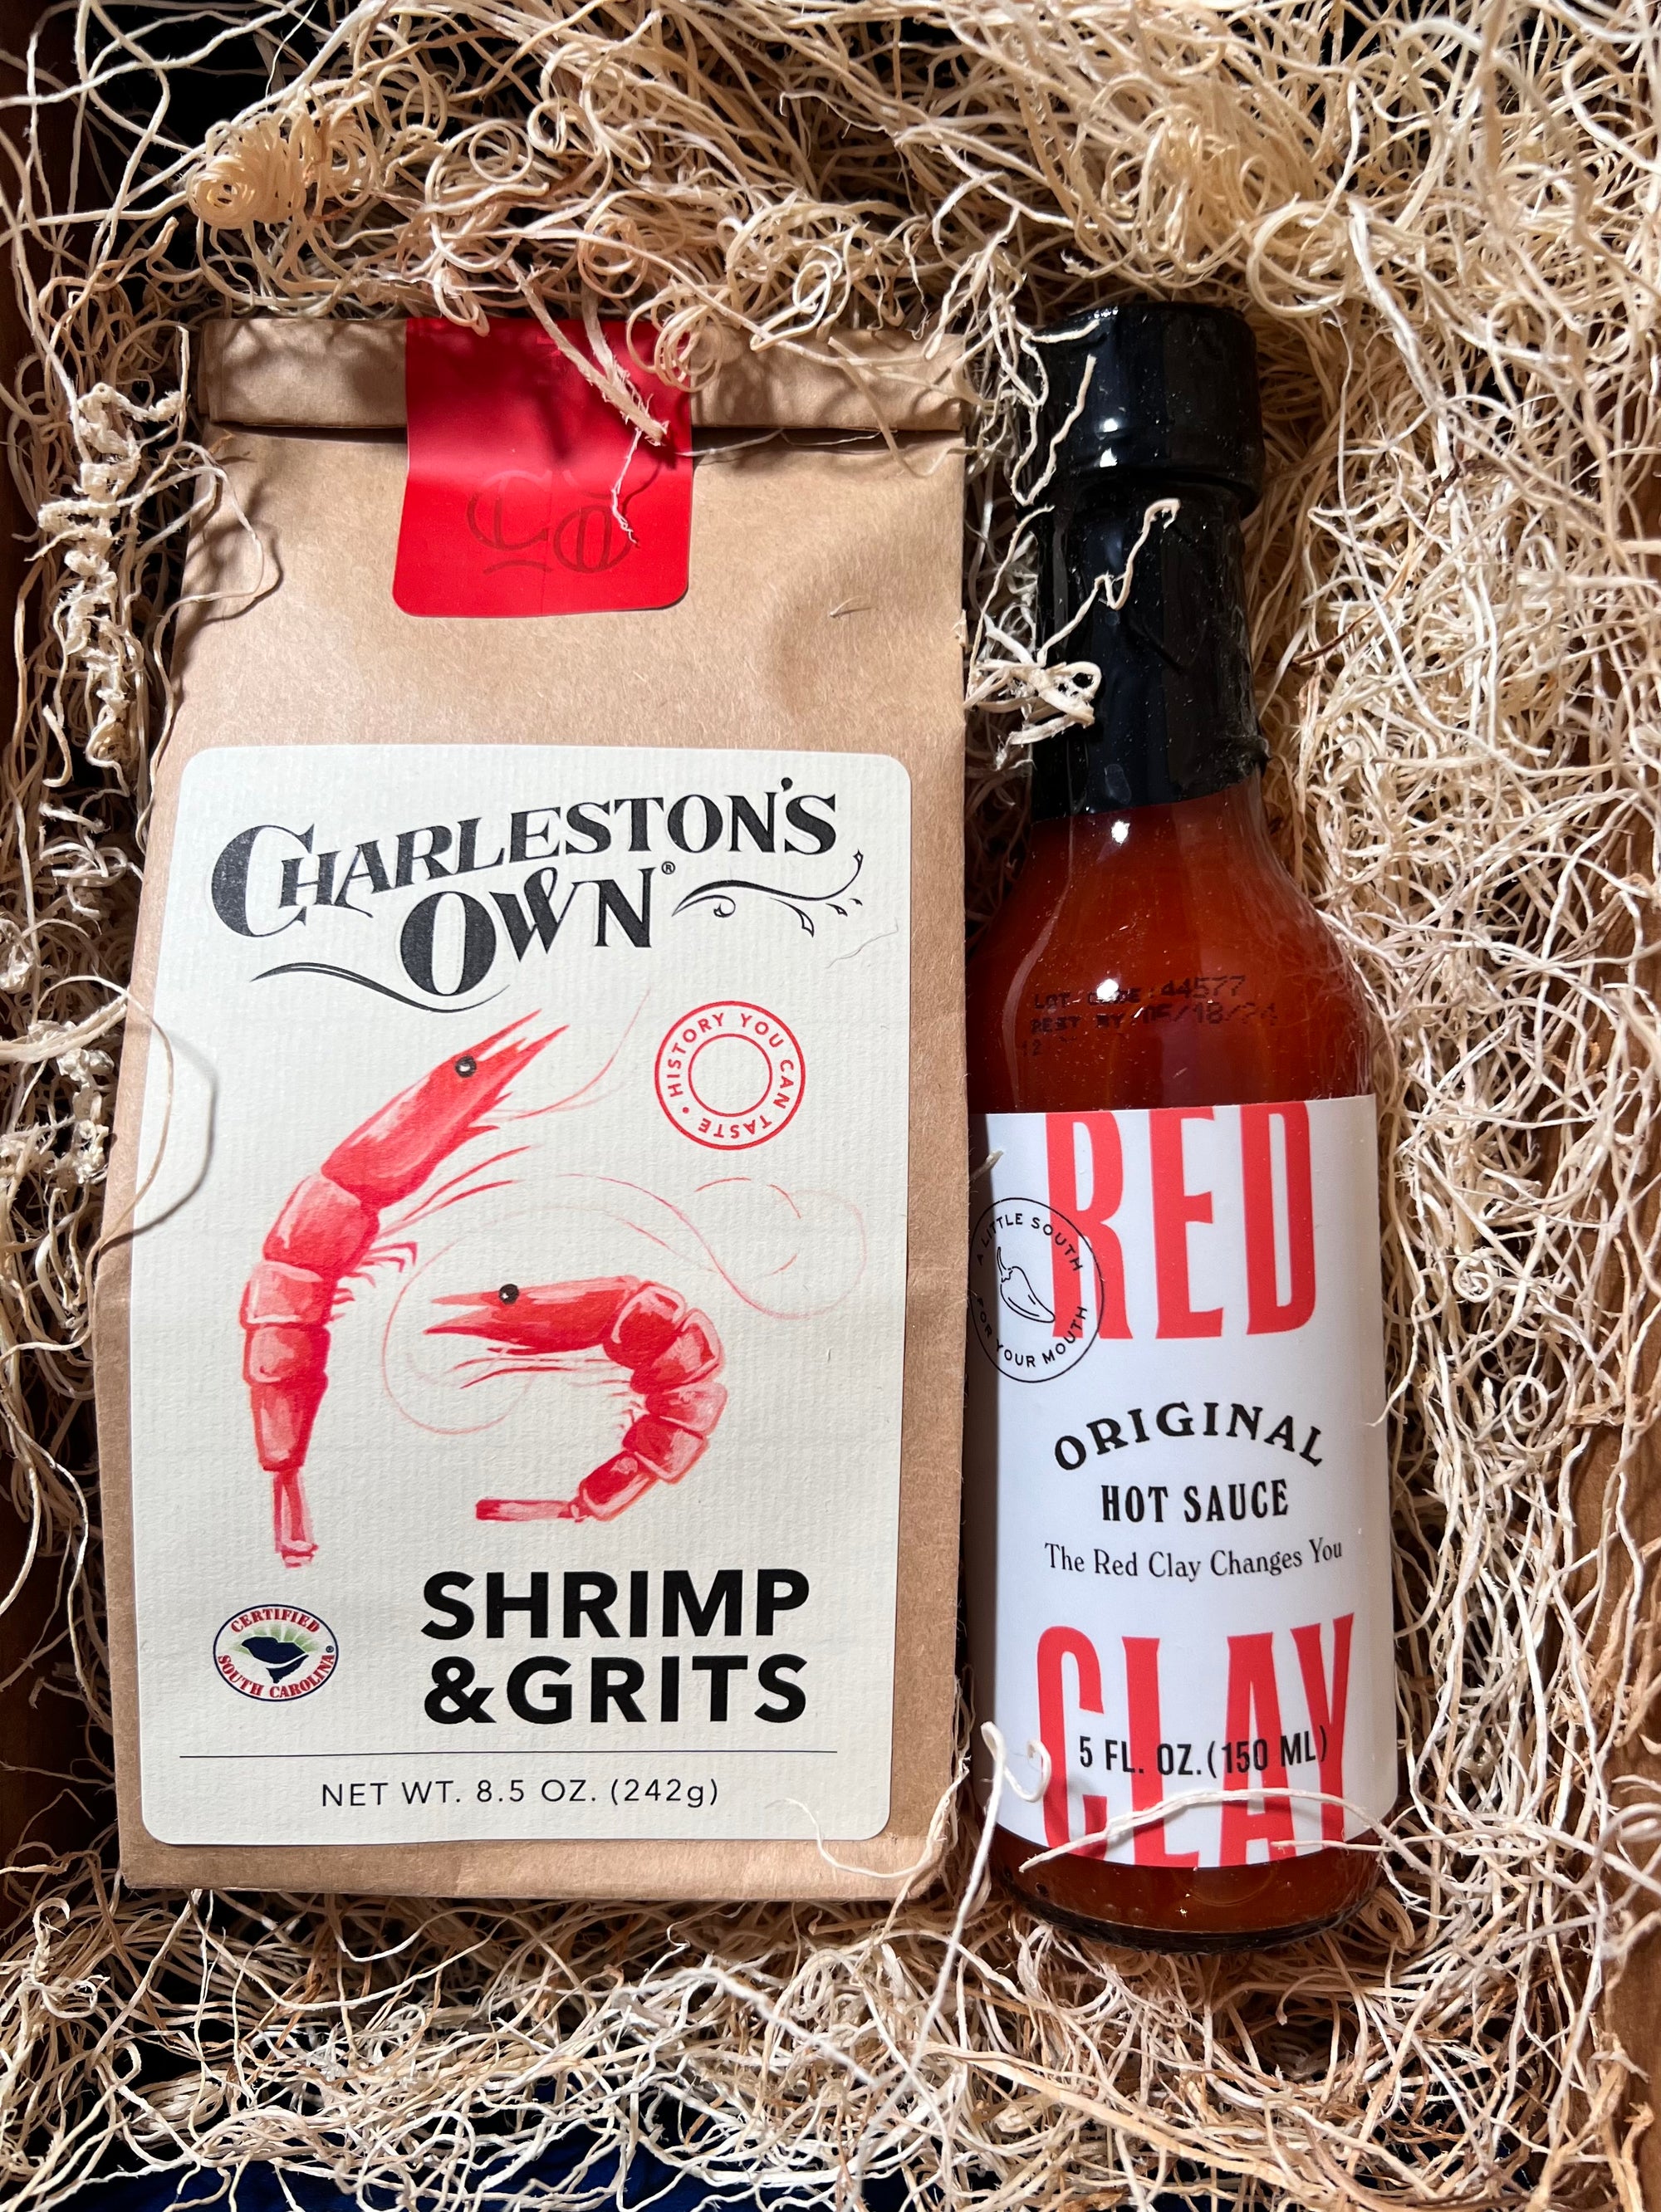 Perfect Pair: Charleston's Own Shrimp & Grits + Red Clay Hot Sauce